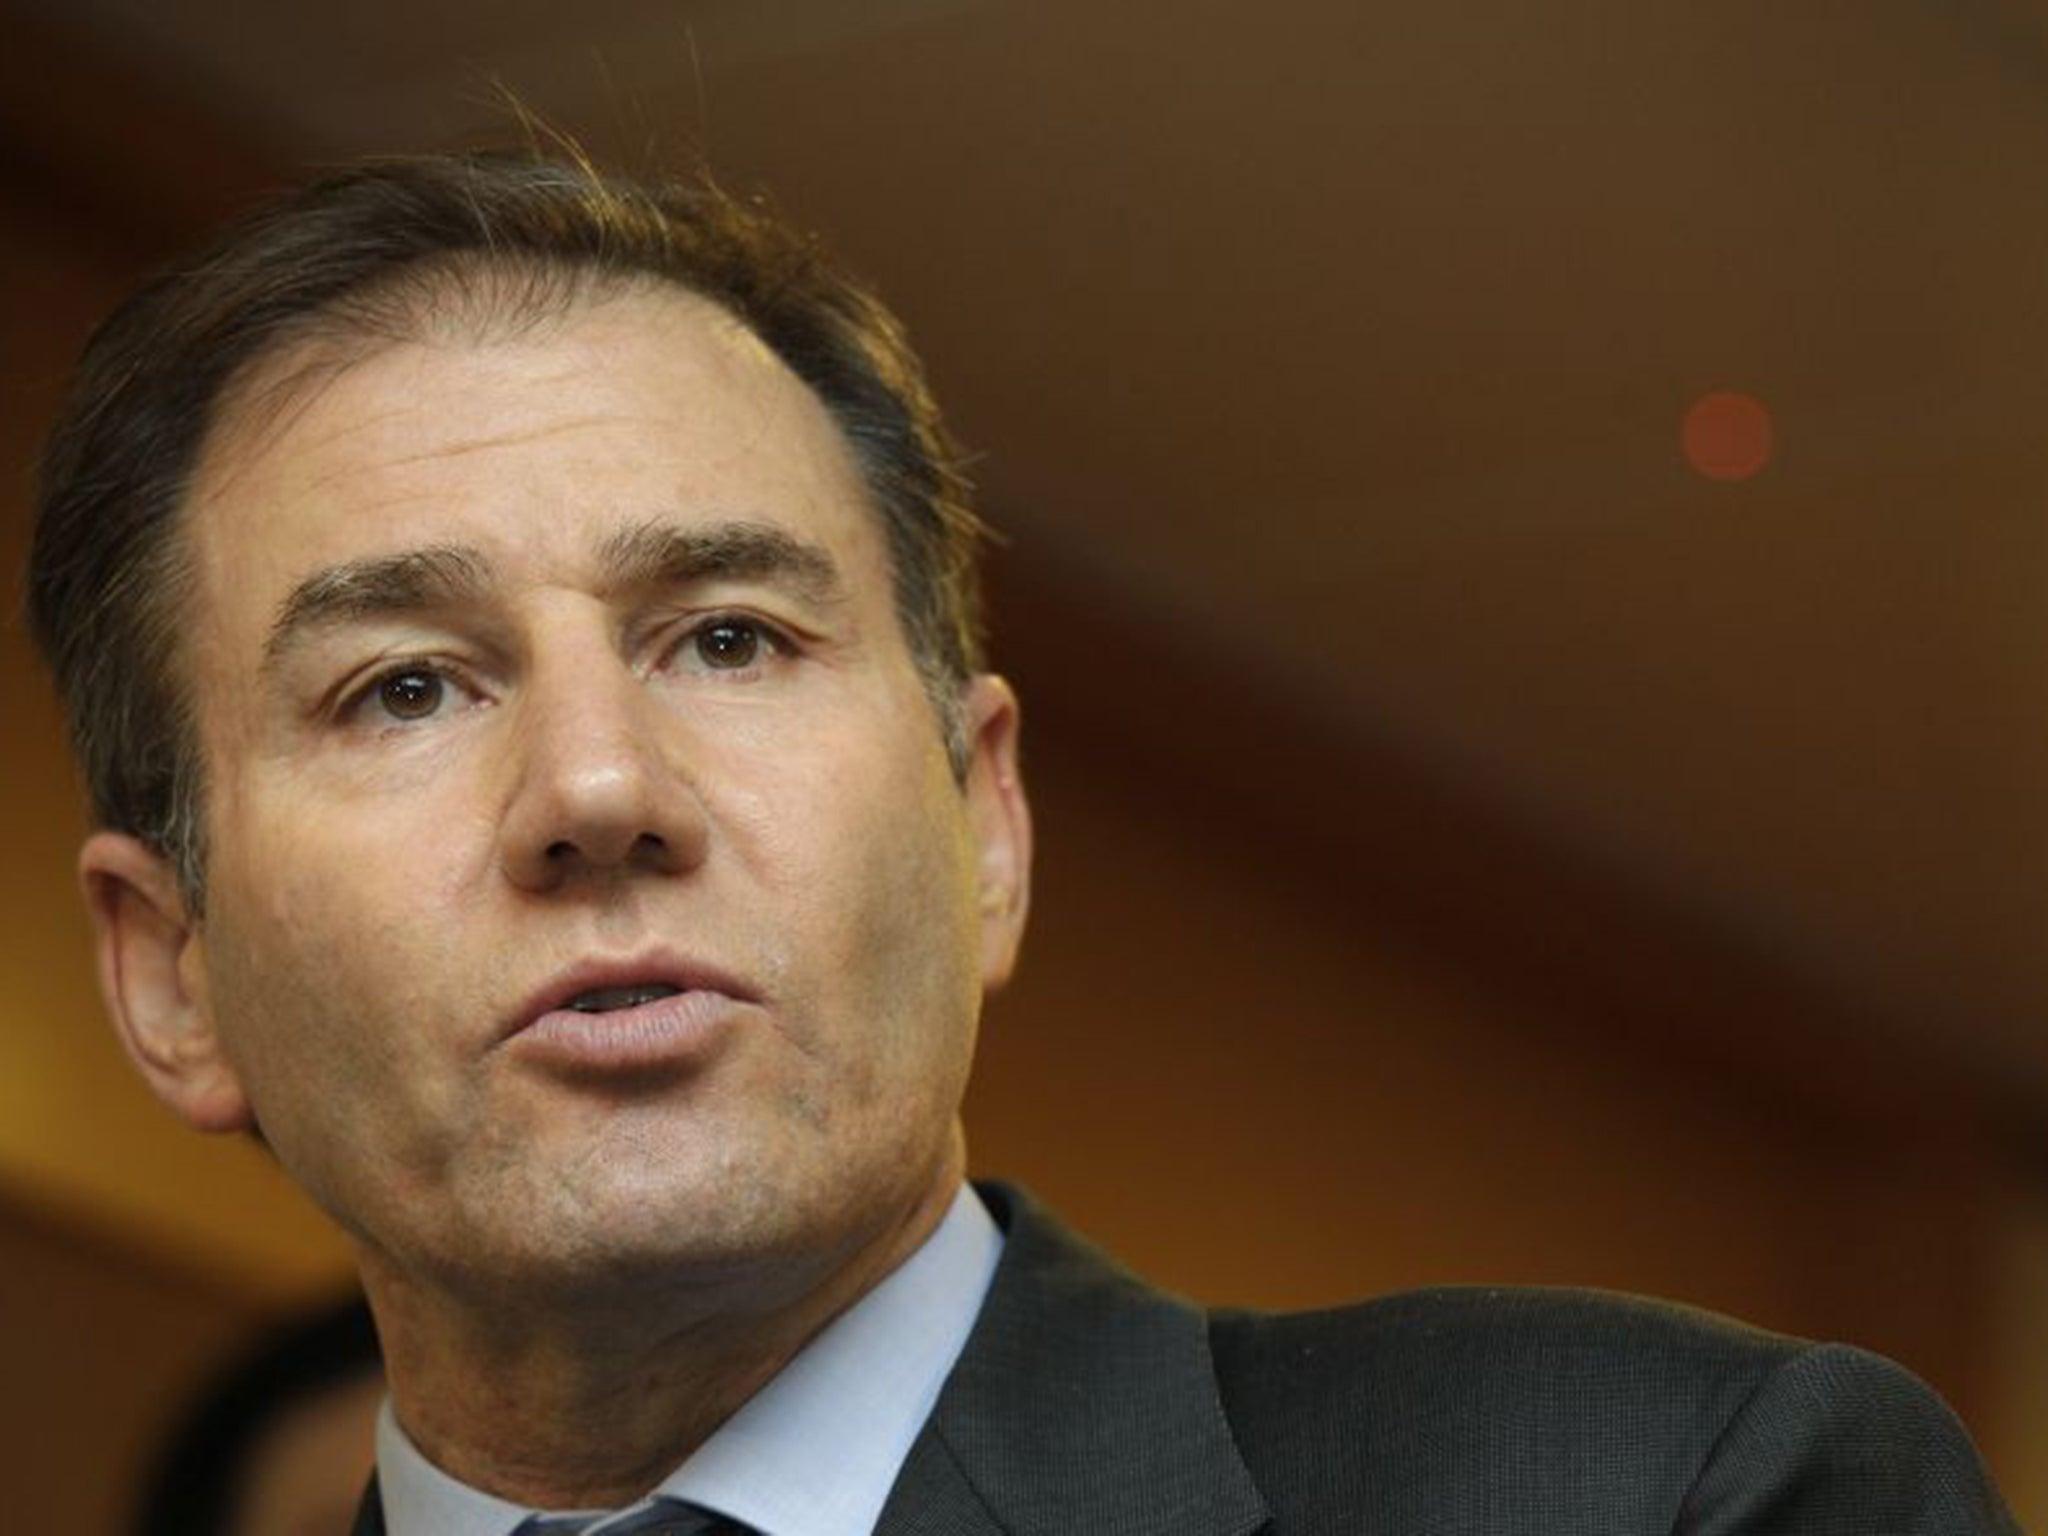 Ivan Glasenberg’s stake in Glencore is now worth less than £1bn, compared to about £6bn when the company was floated